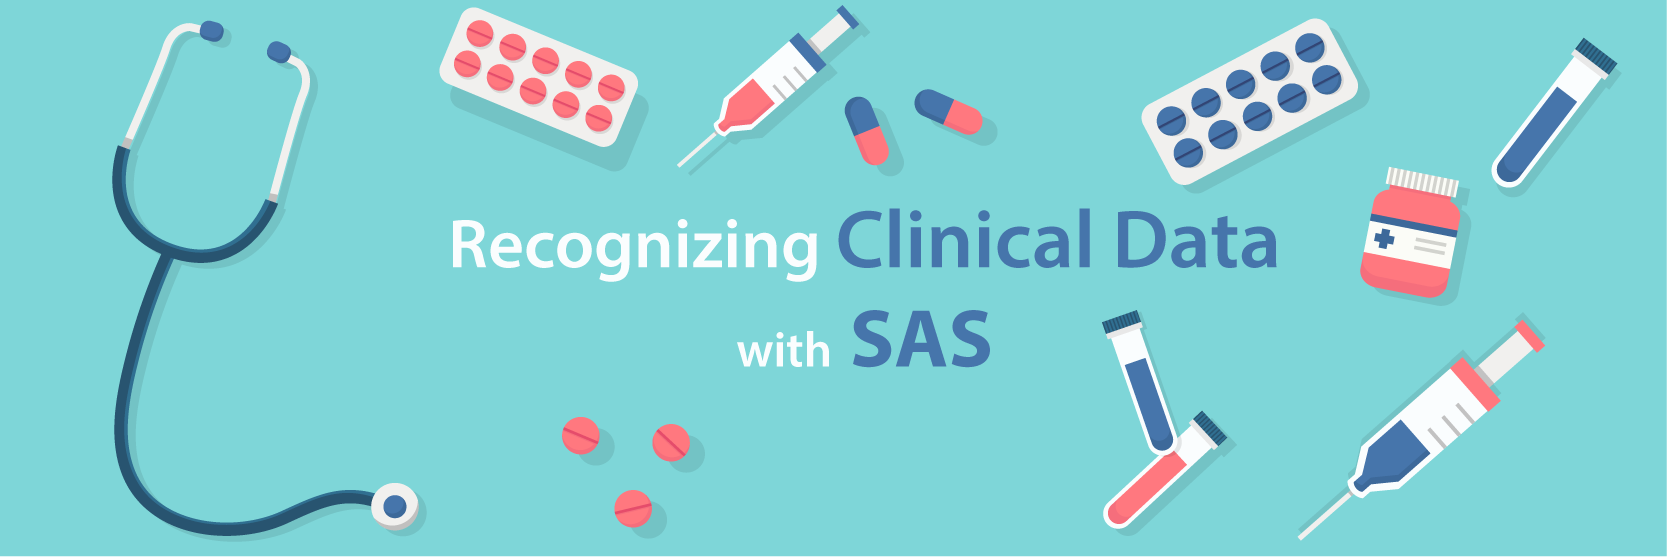 Recognizing Clinical data with SAS